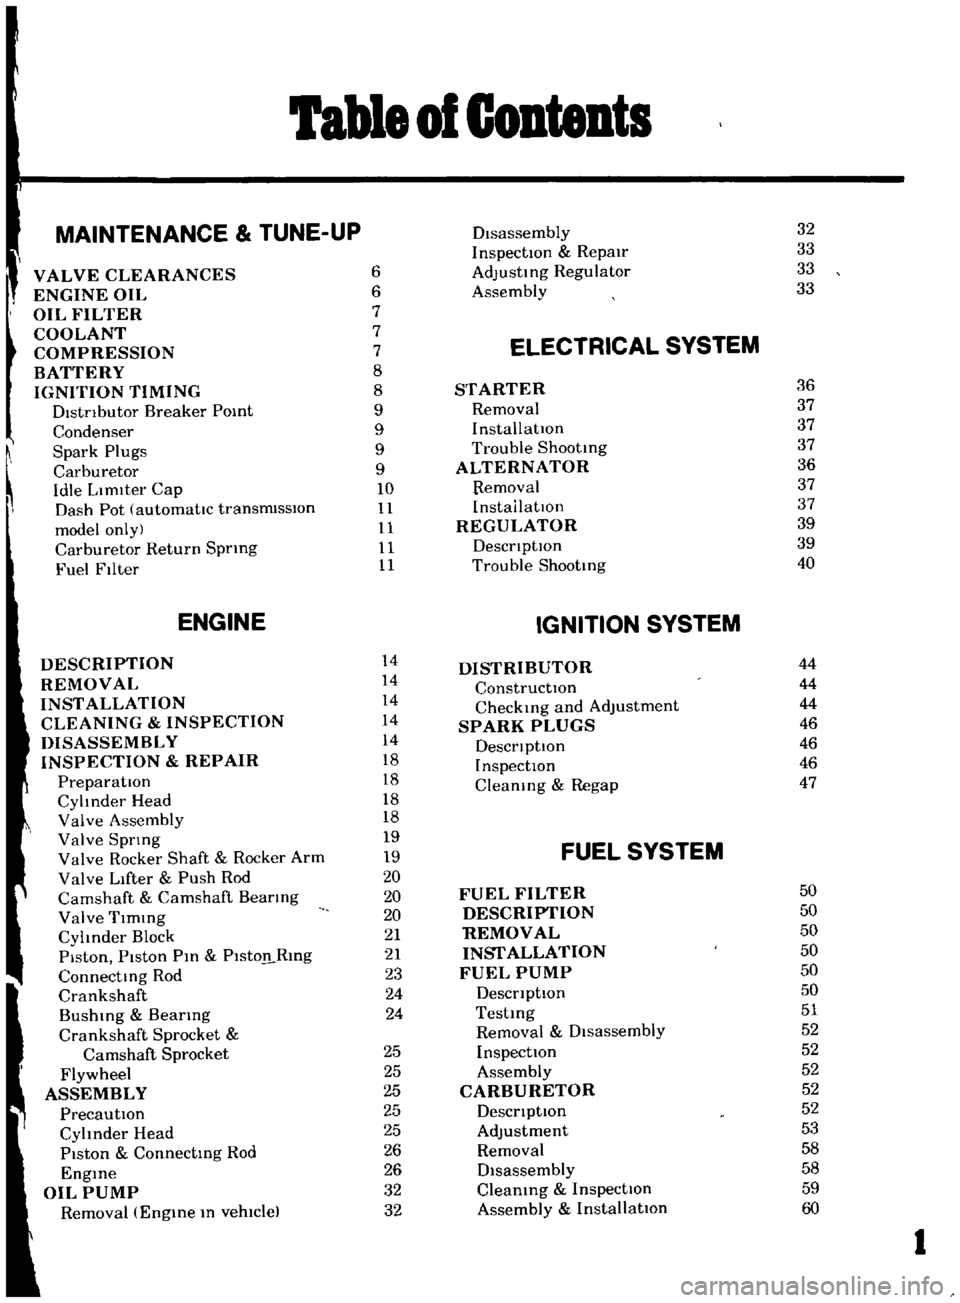 DATSUN B110 1969  Service Repair Manual 
able 
of

Contents

MAINTENANCE 
TUNE

UP

DIsassembly 
32

InspectIOn 
RepaIr 
33

VALVE

CLEARANCES 
6

AdJustmg 
Regulator 
33

ENGINE

OIL

6

Assembly 
33

OIL 
FILTER

7

COOLANT 
7

COMPRESSIO